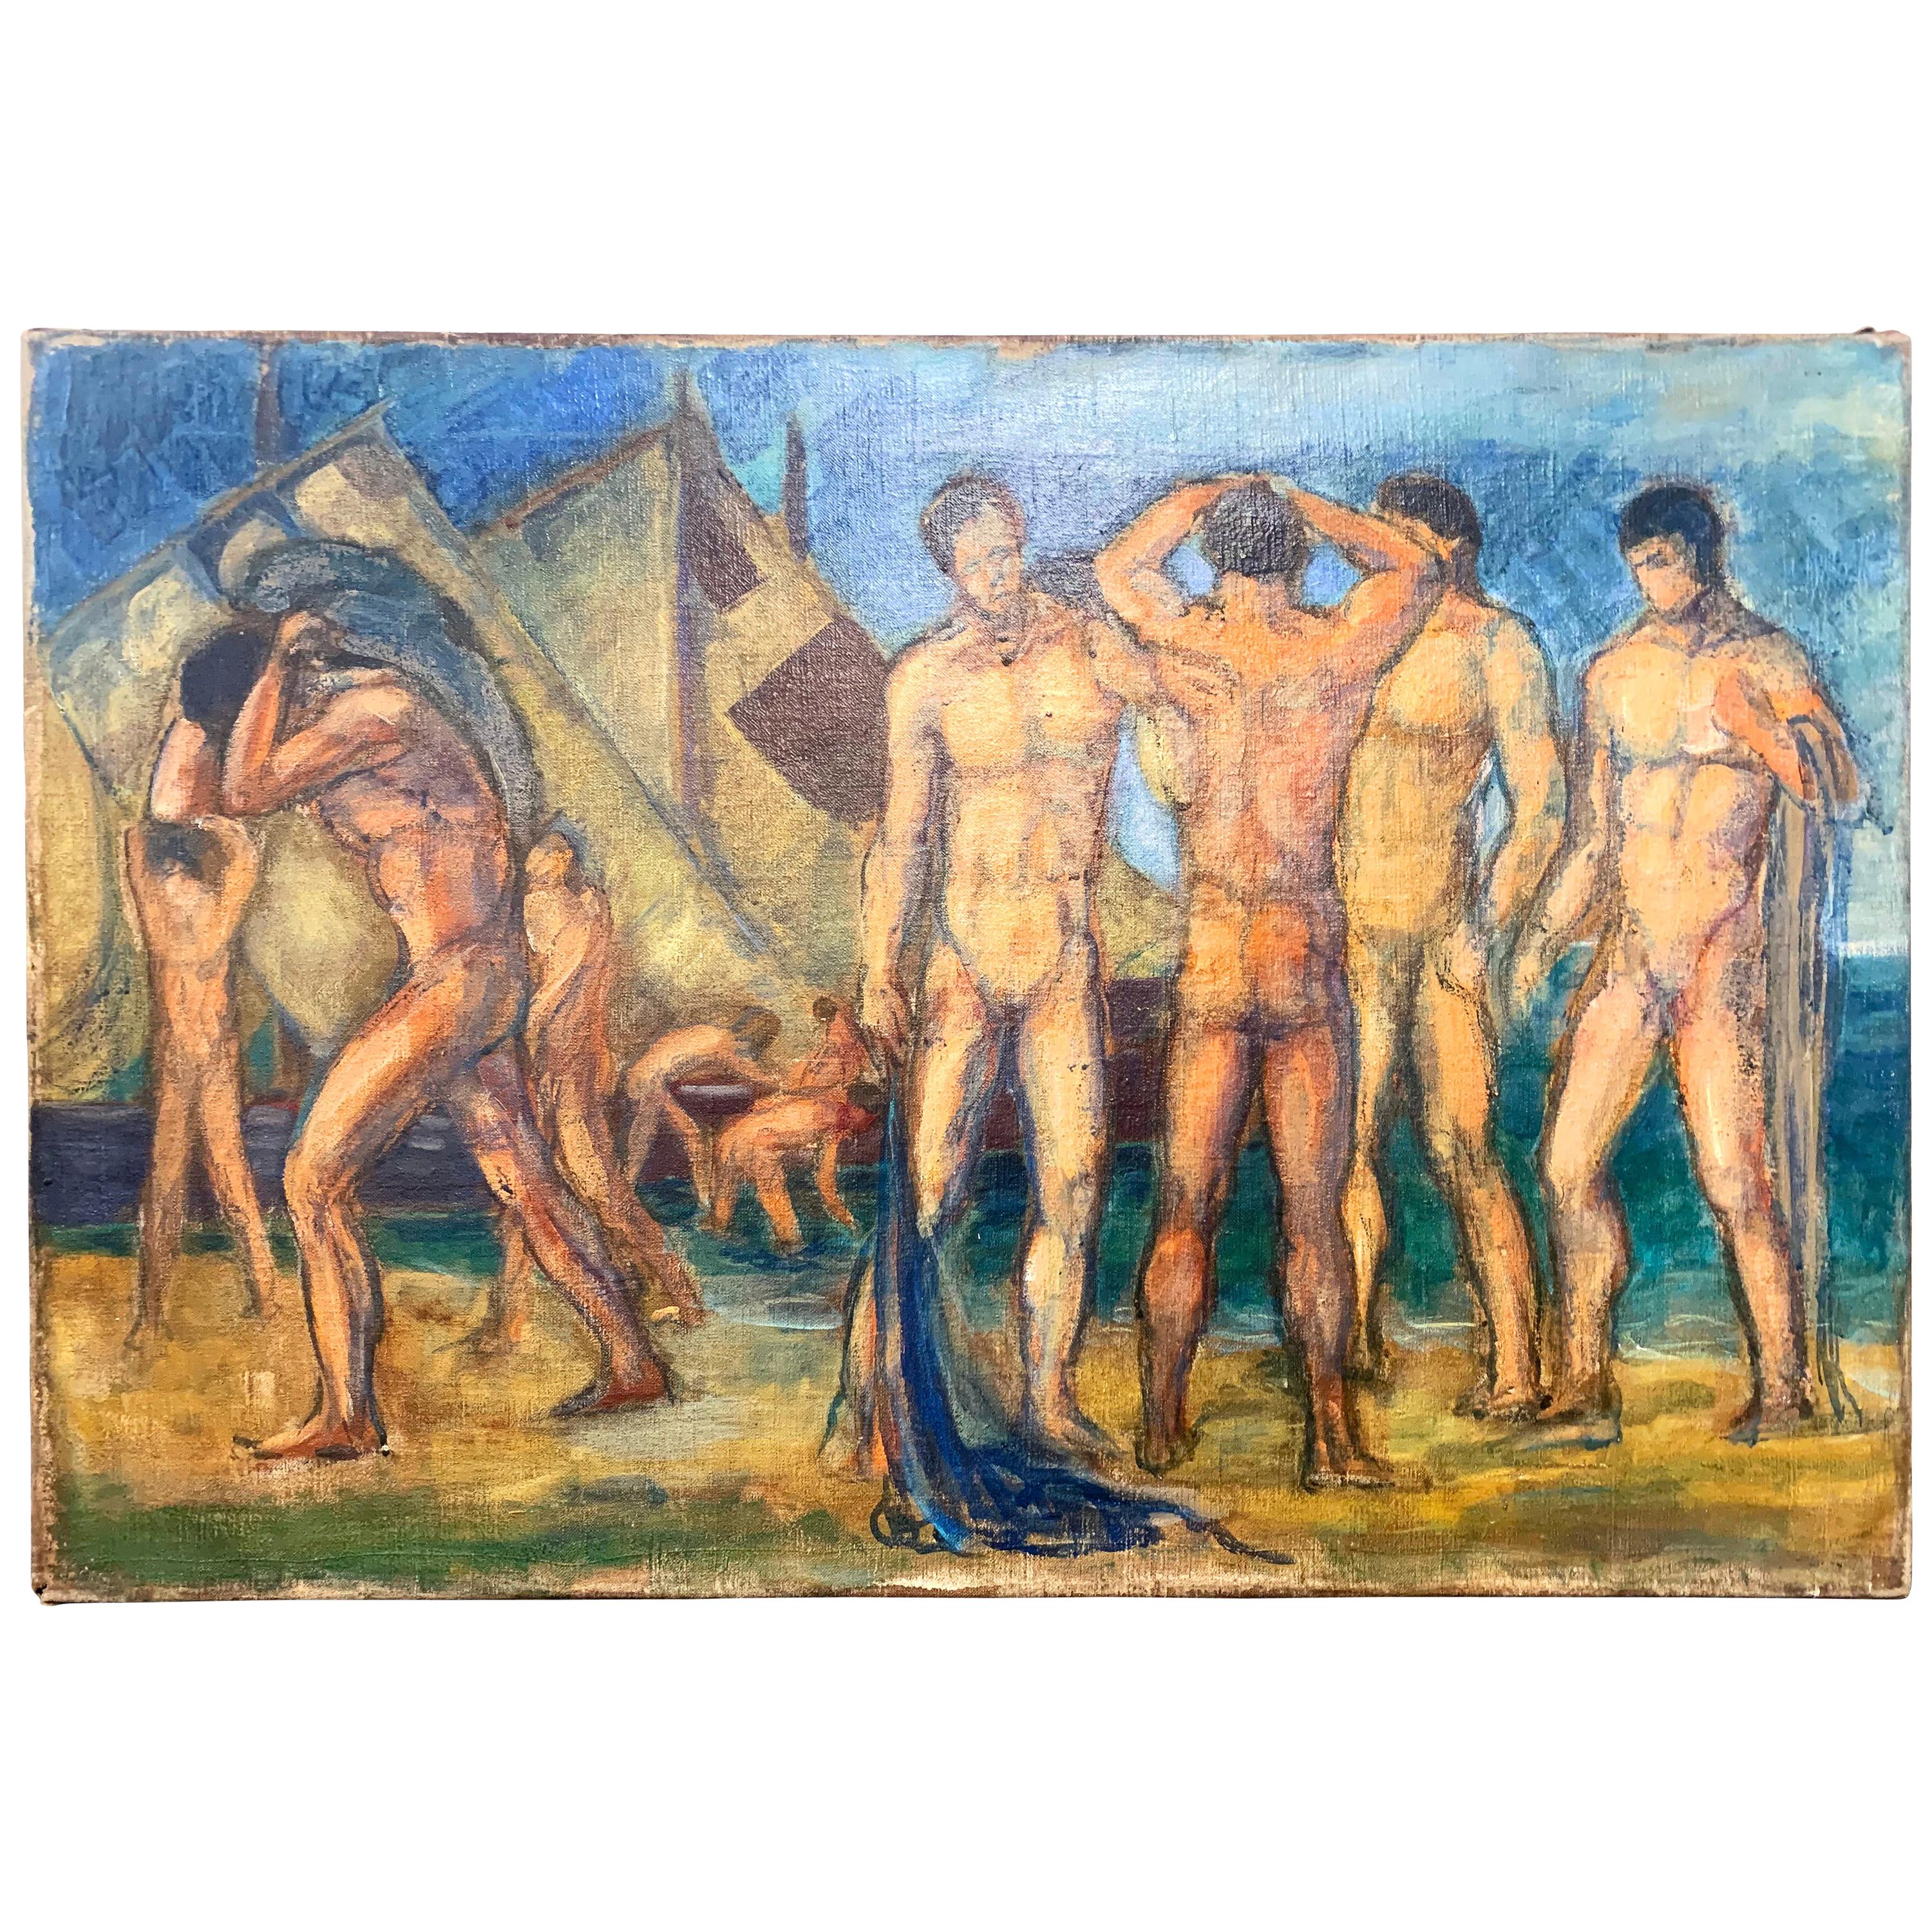 "Frieze of Nude Male Figures," Art Deco Scene of Bathers and Workers, France